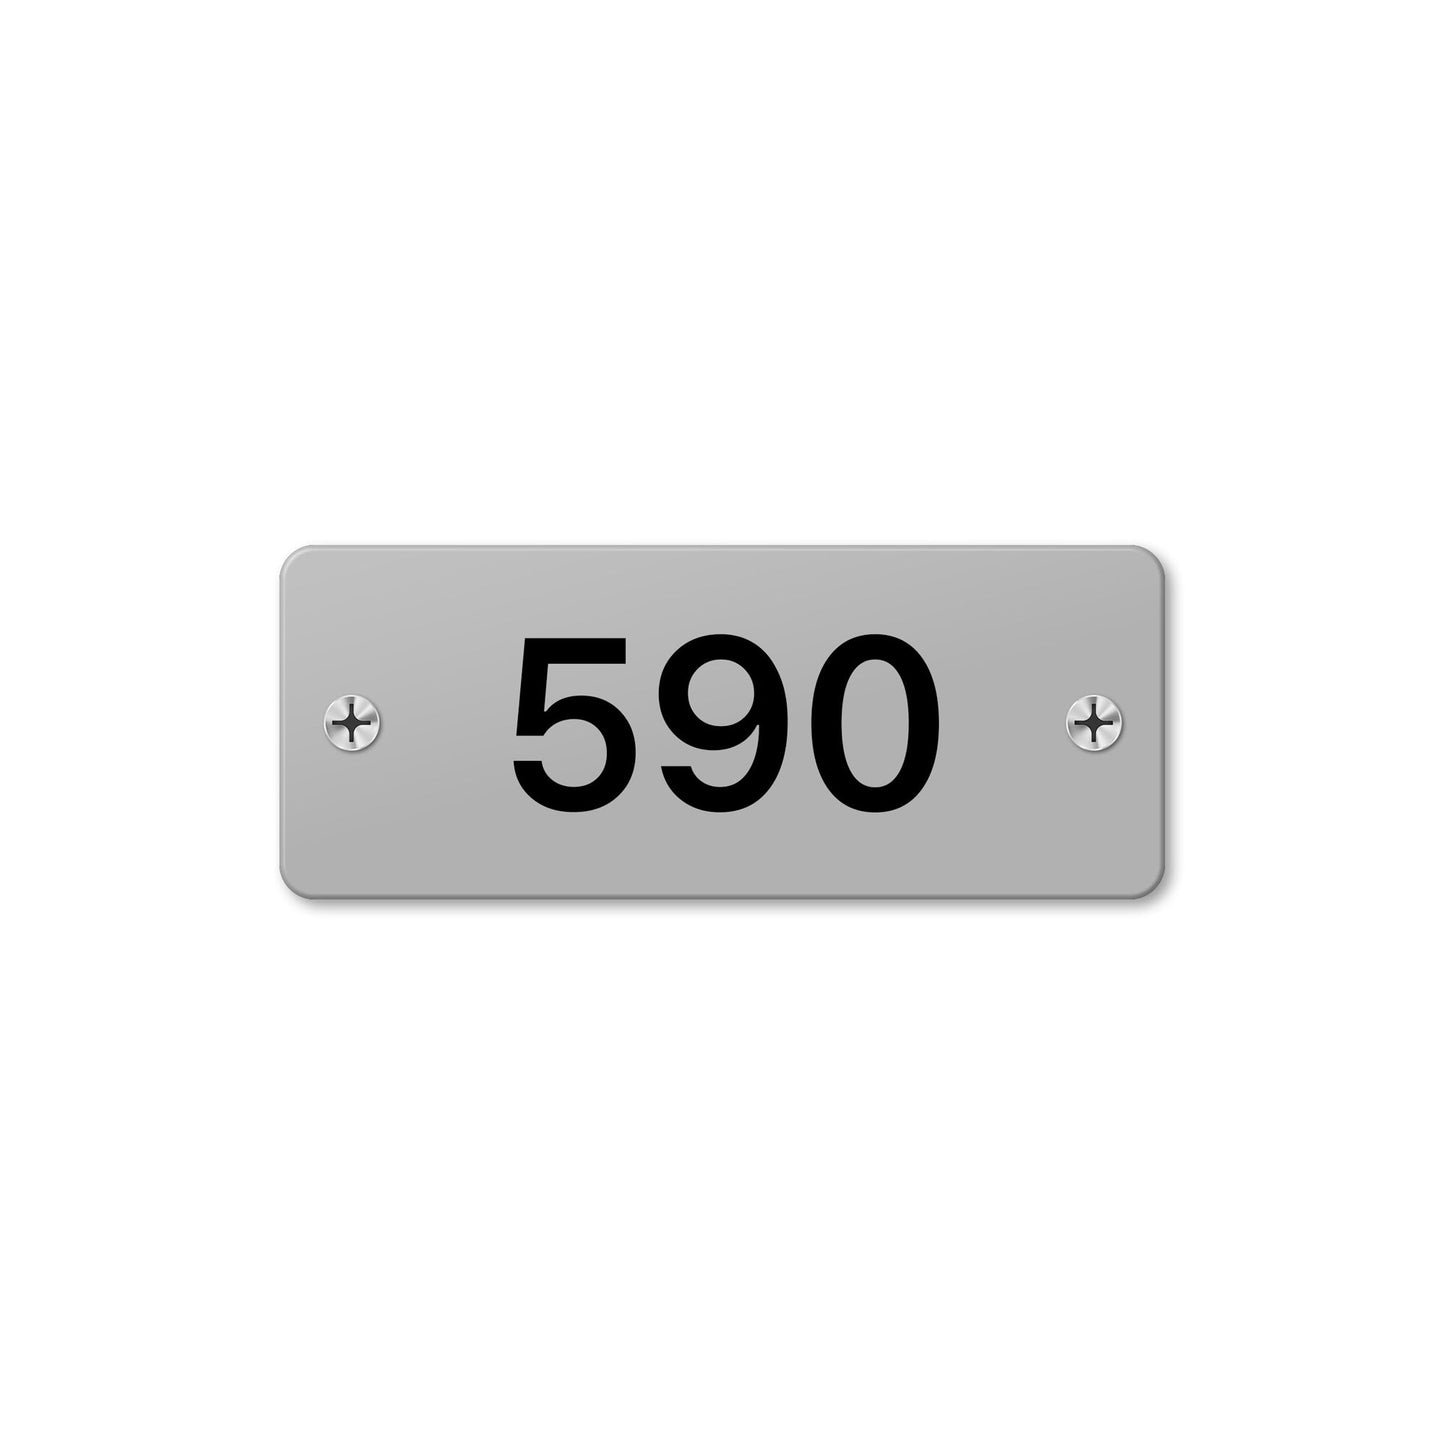 Numeral 590